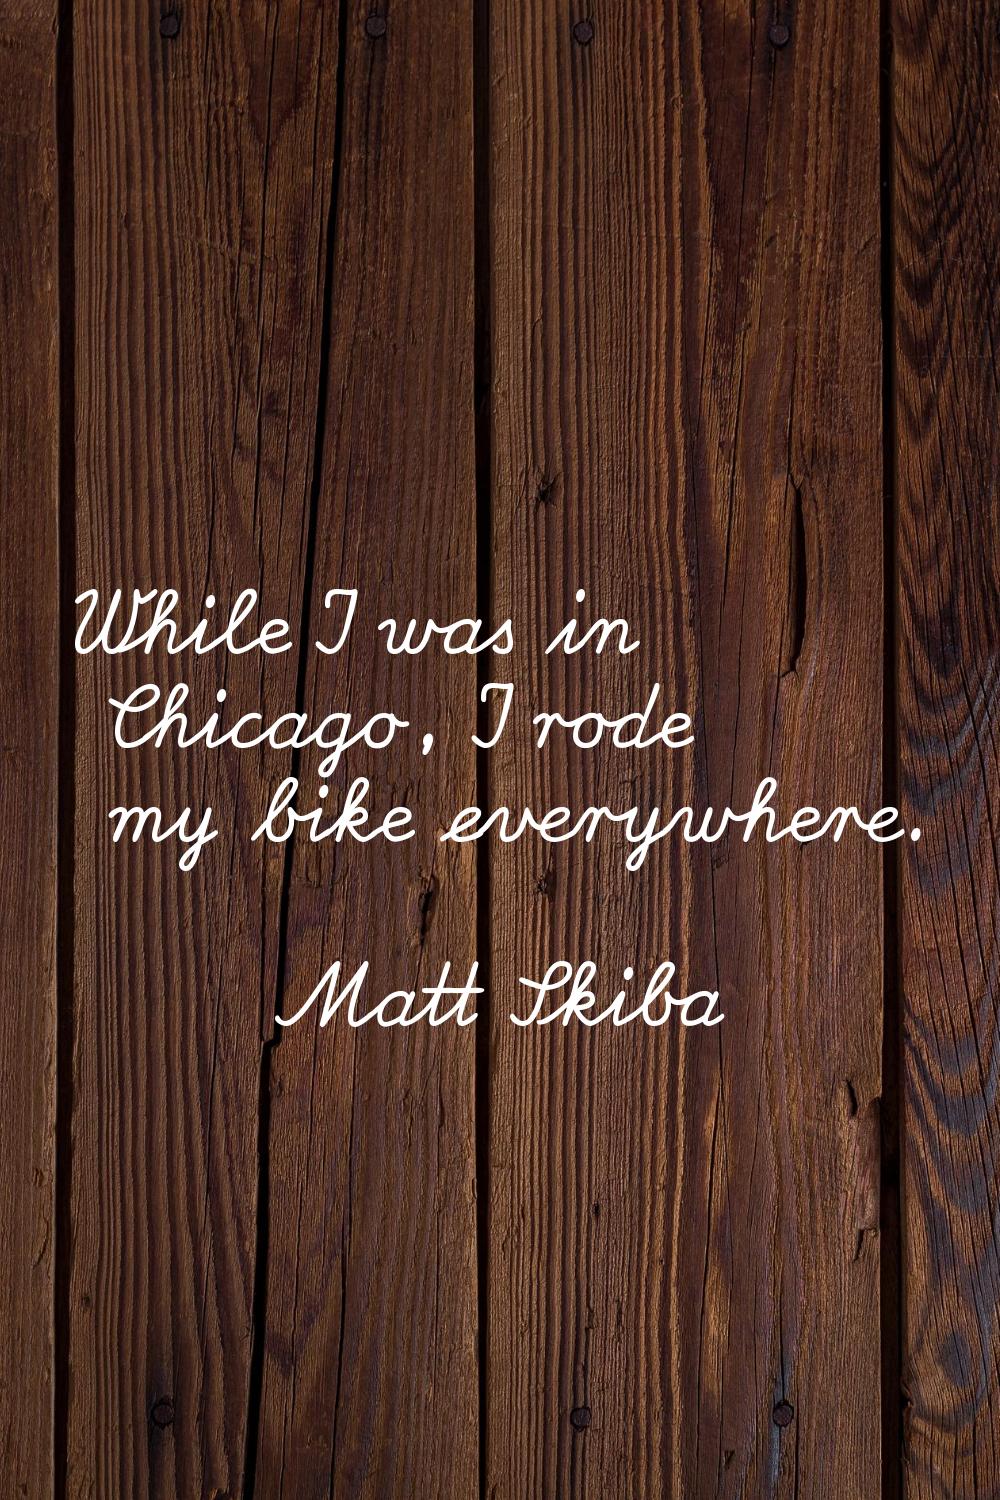 While I was in Chicago, I rode my bike everywhere.